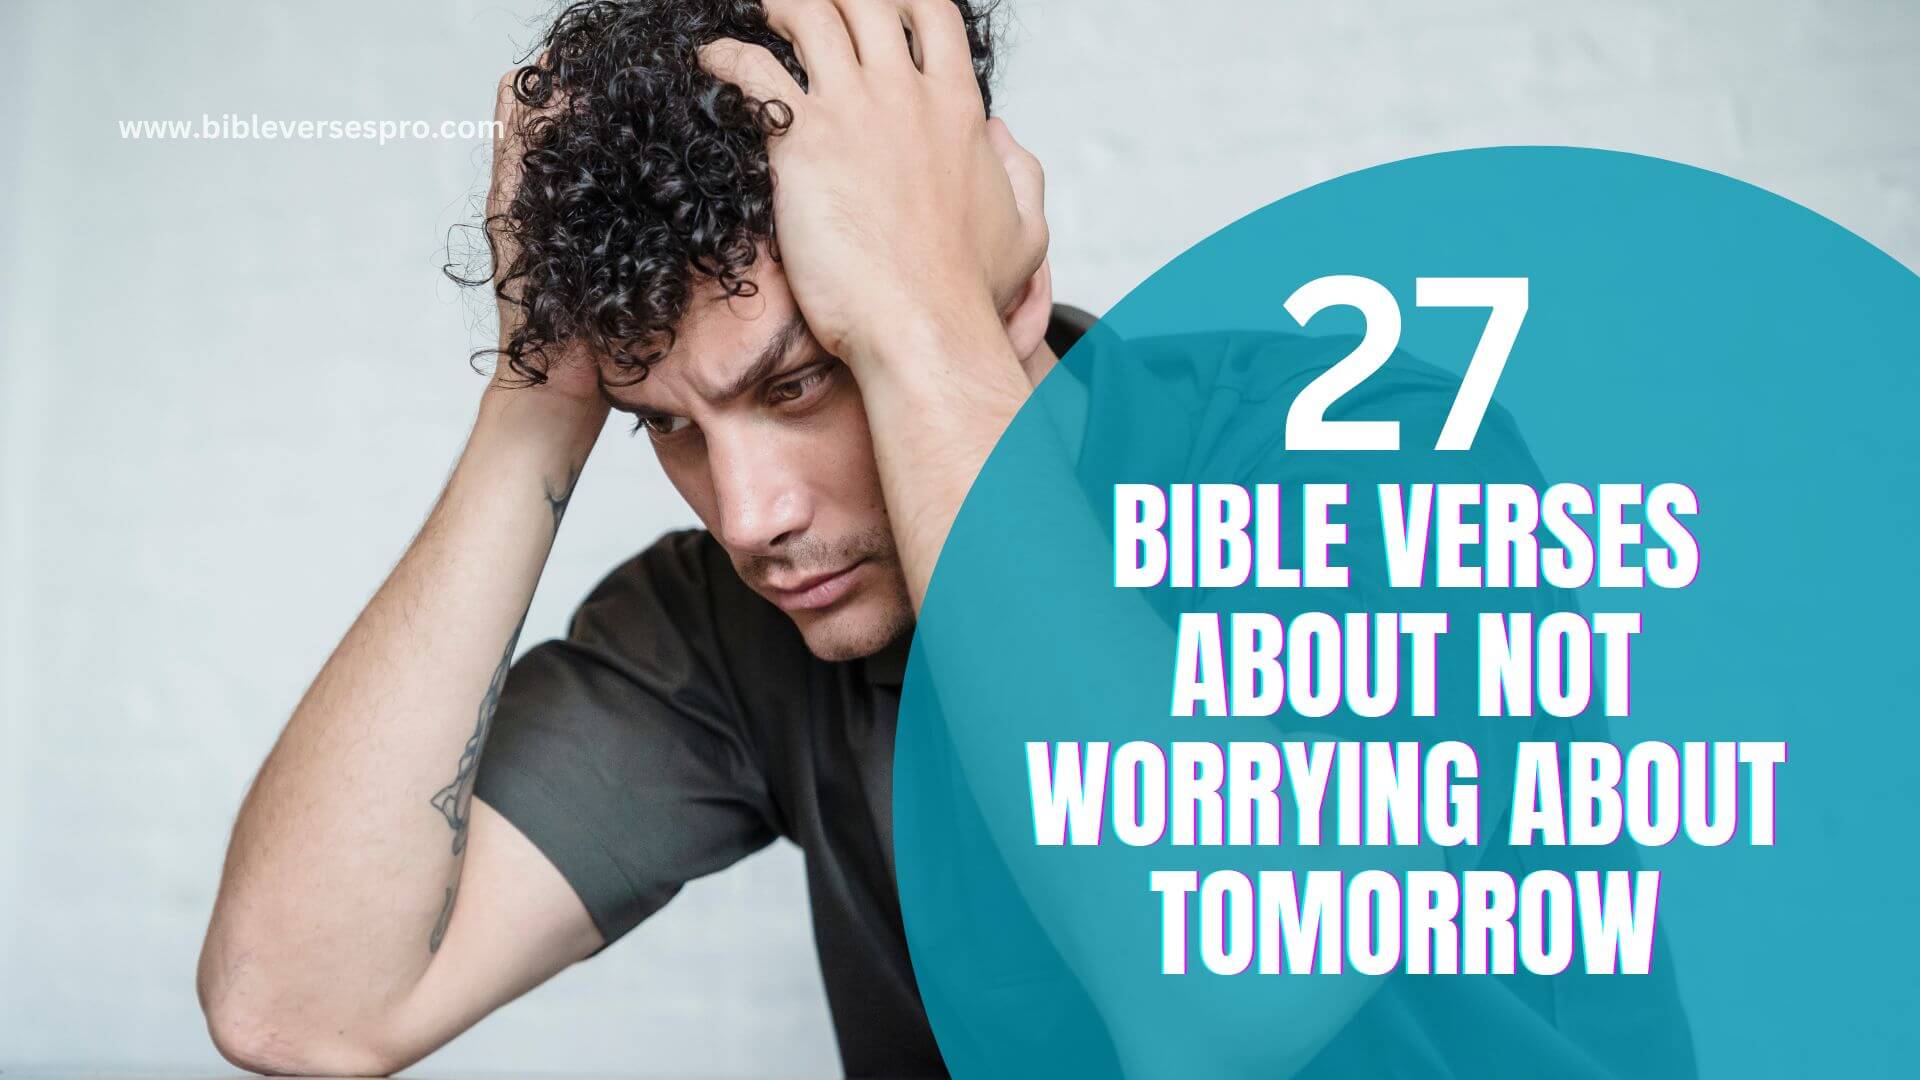 Bible Verses About Not Worrying About Tomorrow (1)